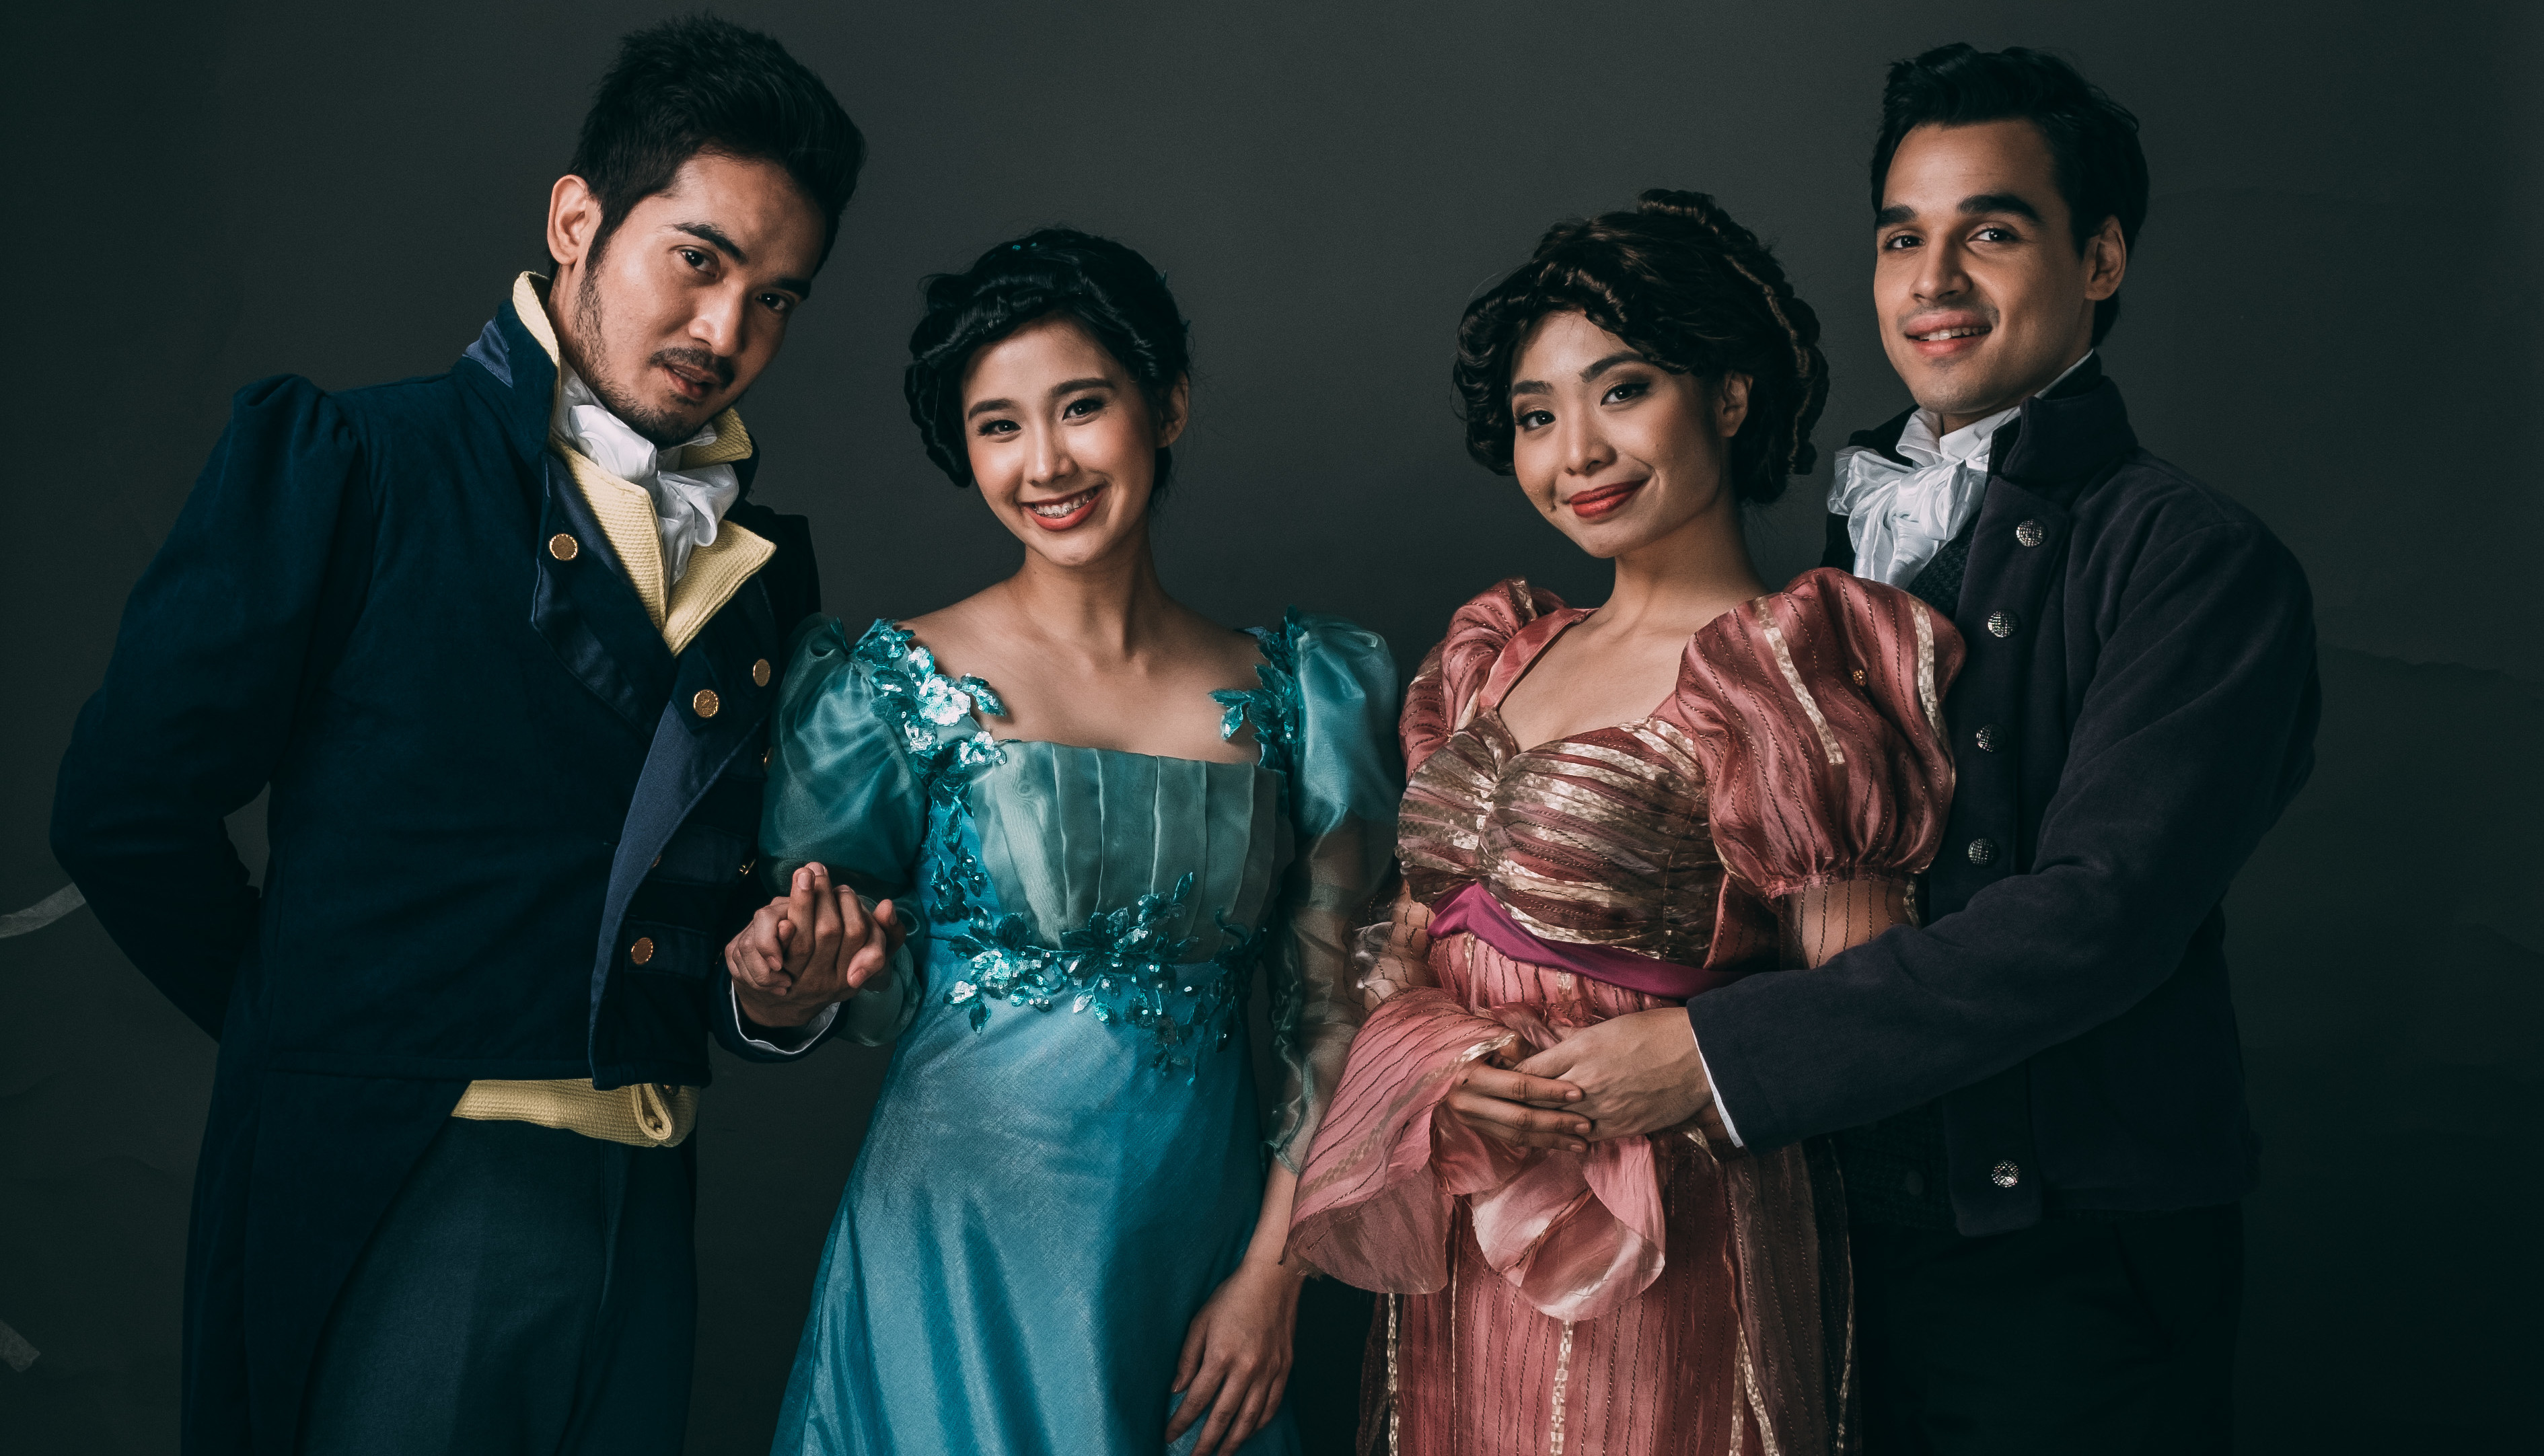 Part of the cast members are (from left) Al Gatmaitan who plays the young Scrooge, Mitzie Lao as Emily, Gian Gloria as Sally and Nel Gomez as Fred. CONTRIBUTED PHOTO/9 Works Theatrical